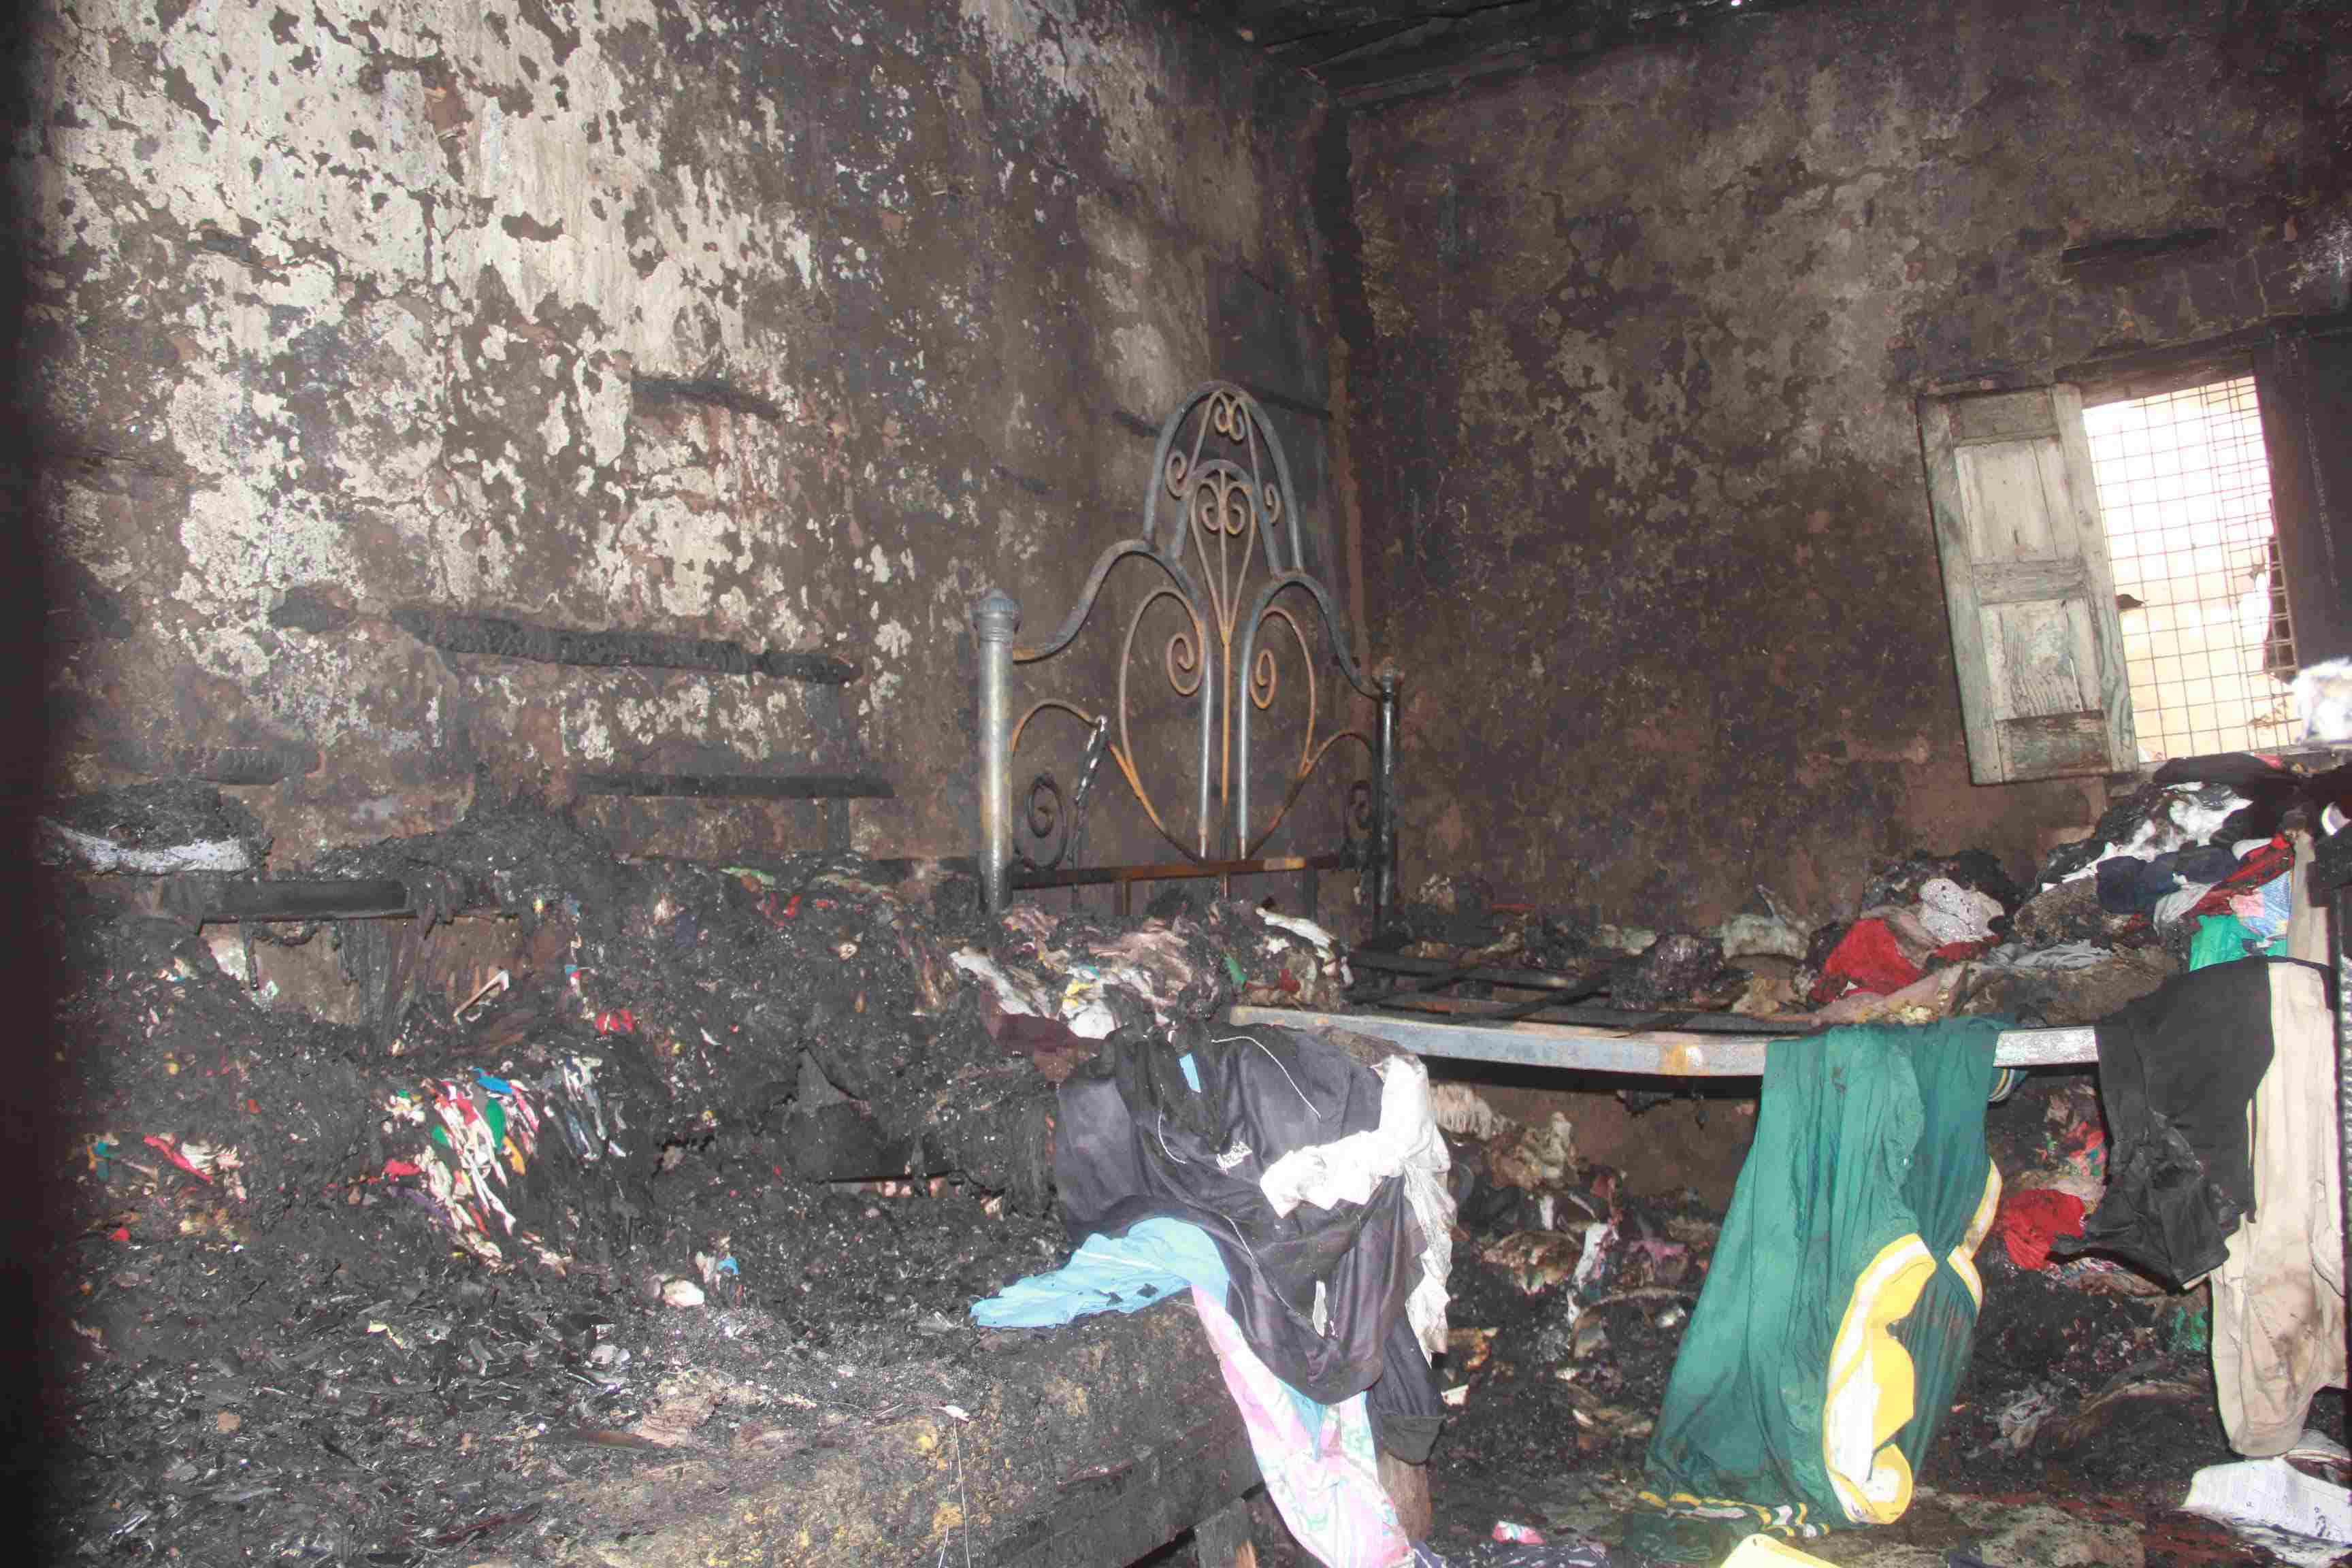 Tragic blaze claims lives of two young children in Kitui Village, Pumwani Ward